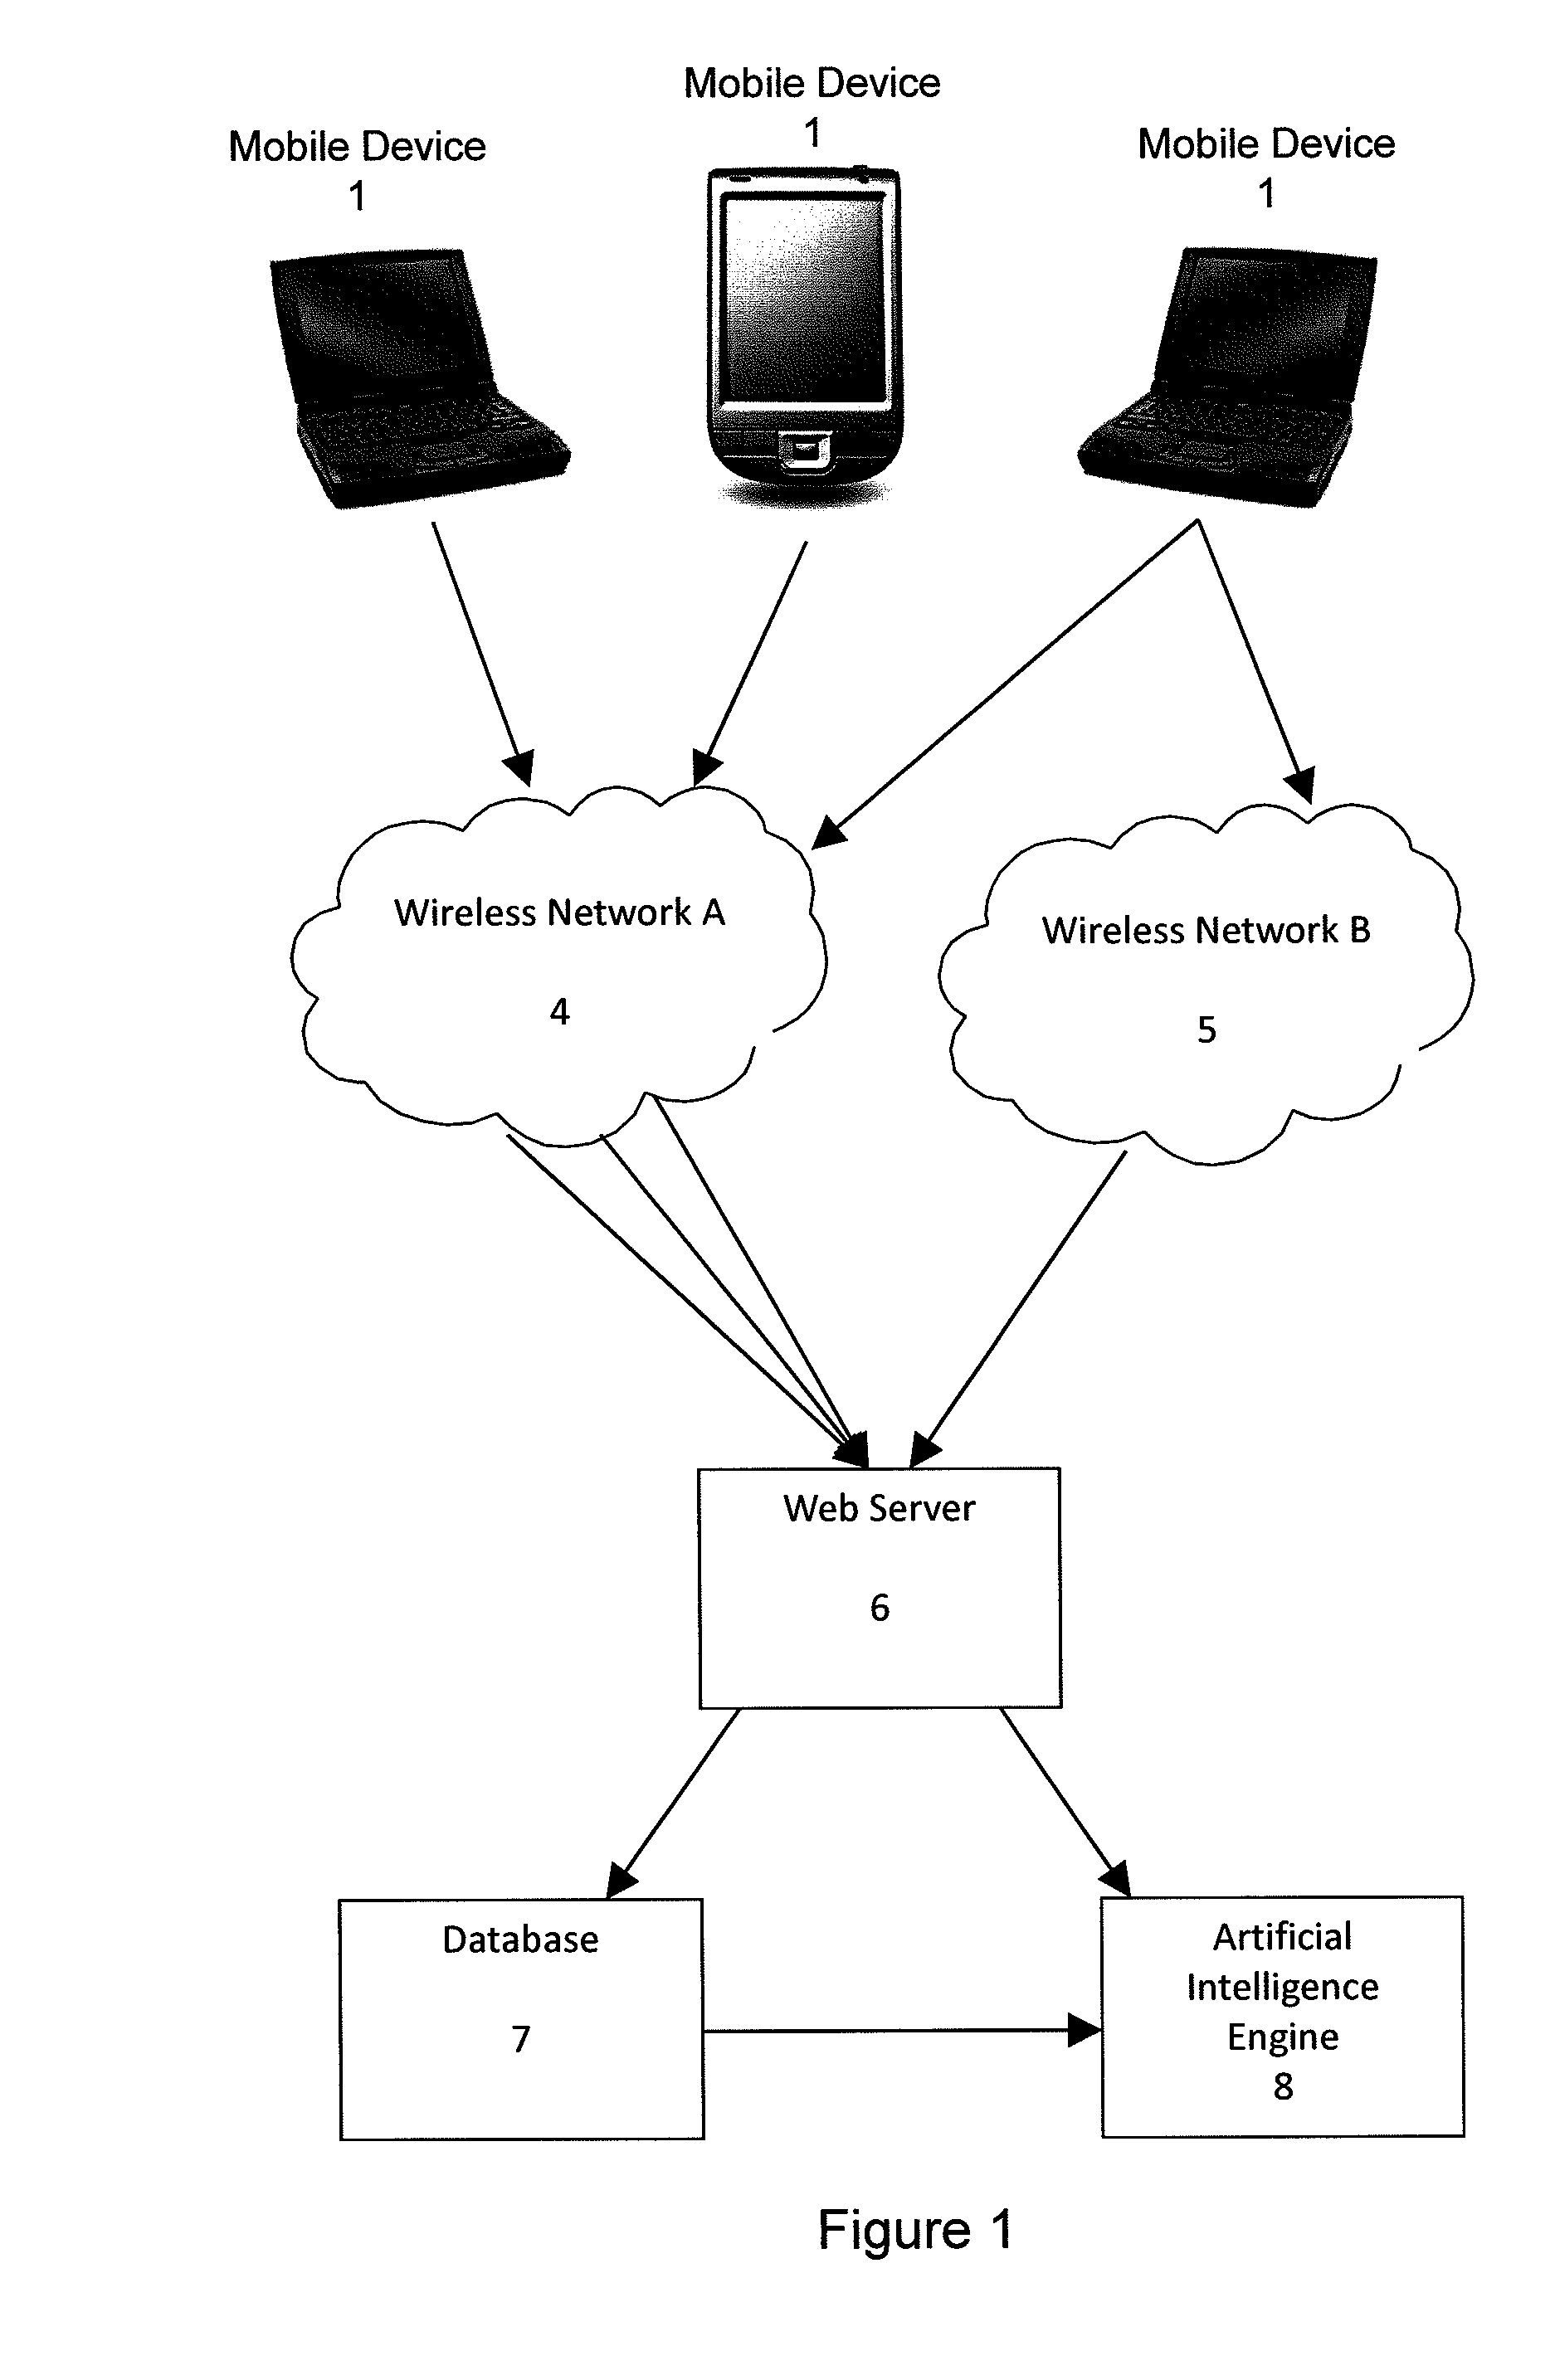 Public wireless network performance management system with mobile device data collection agents